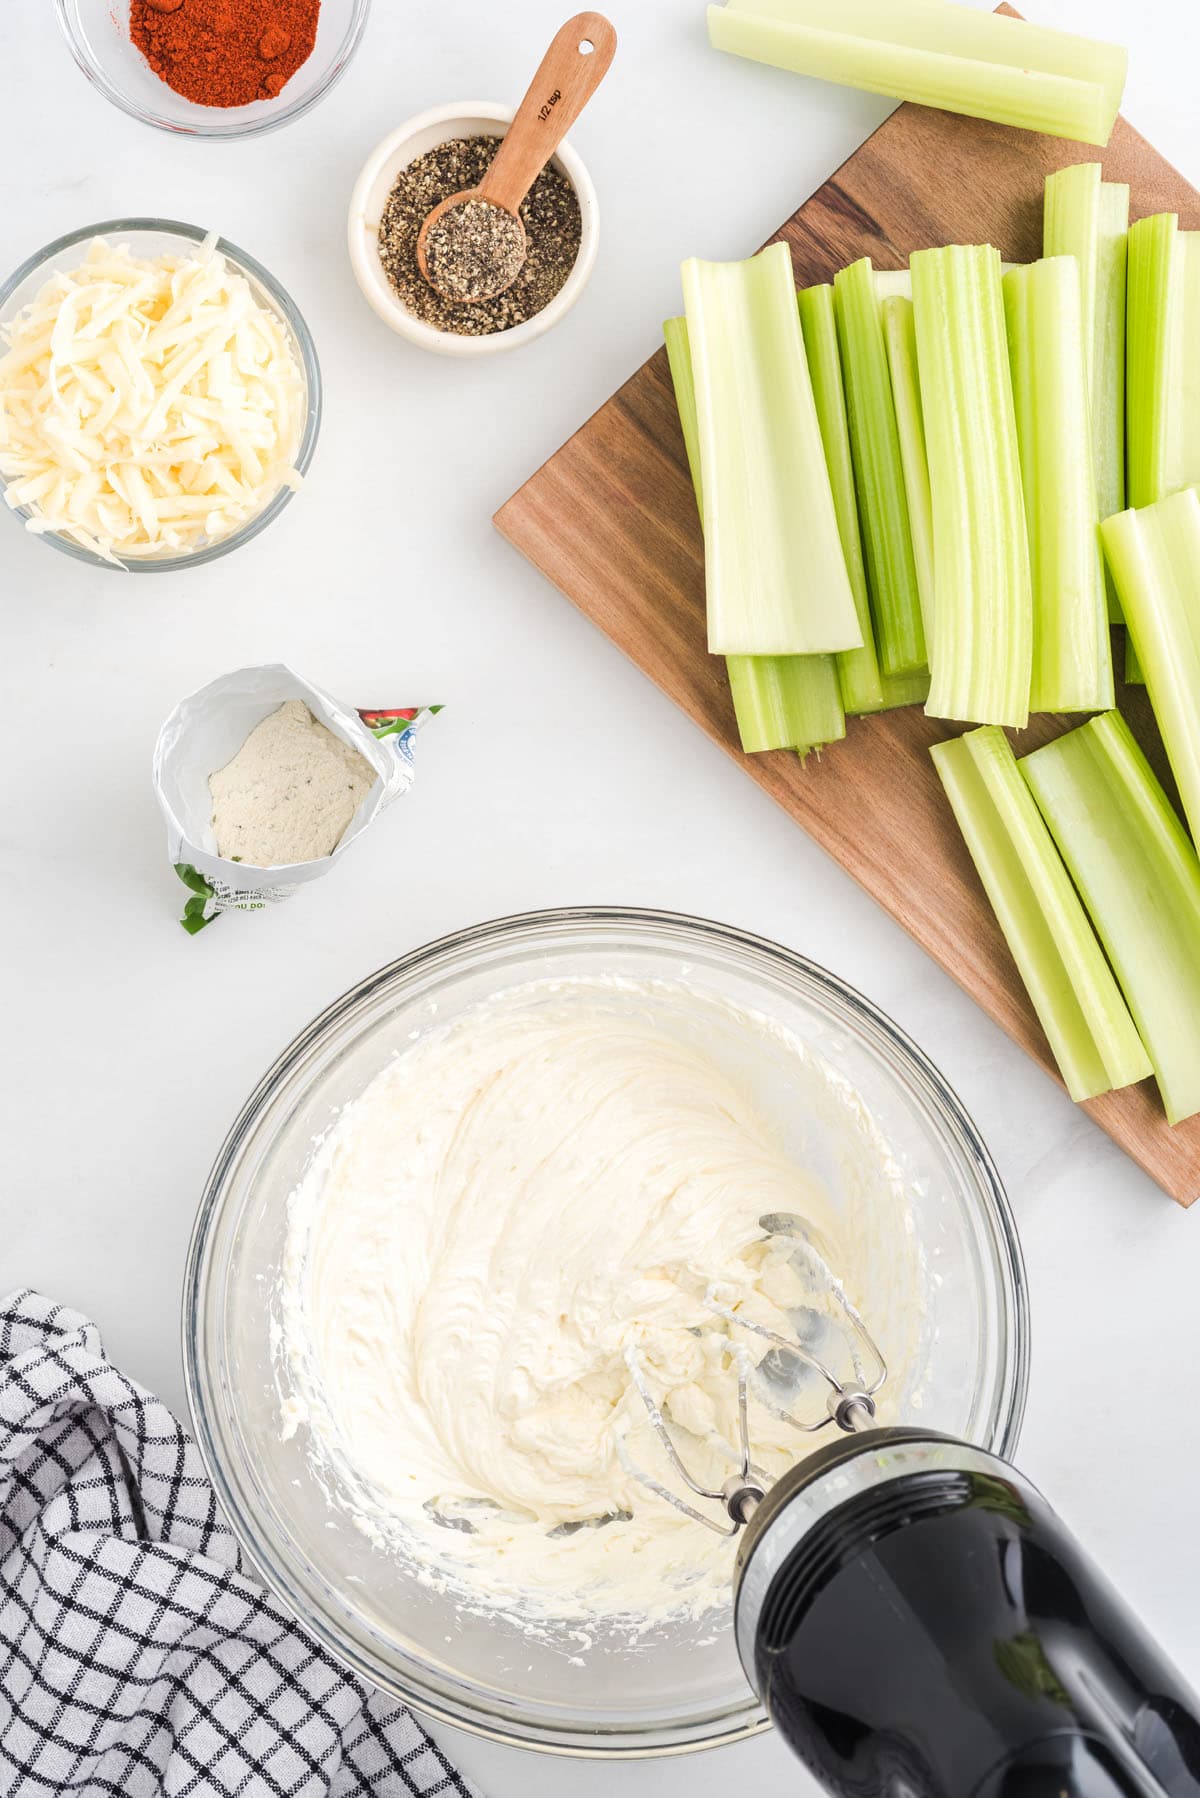 Beat together the cream cheese and mayonnaise with a mixer